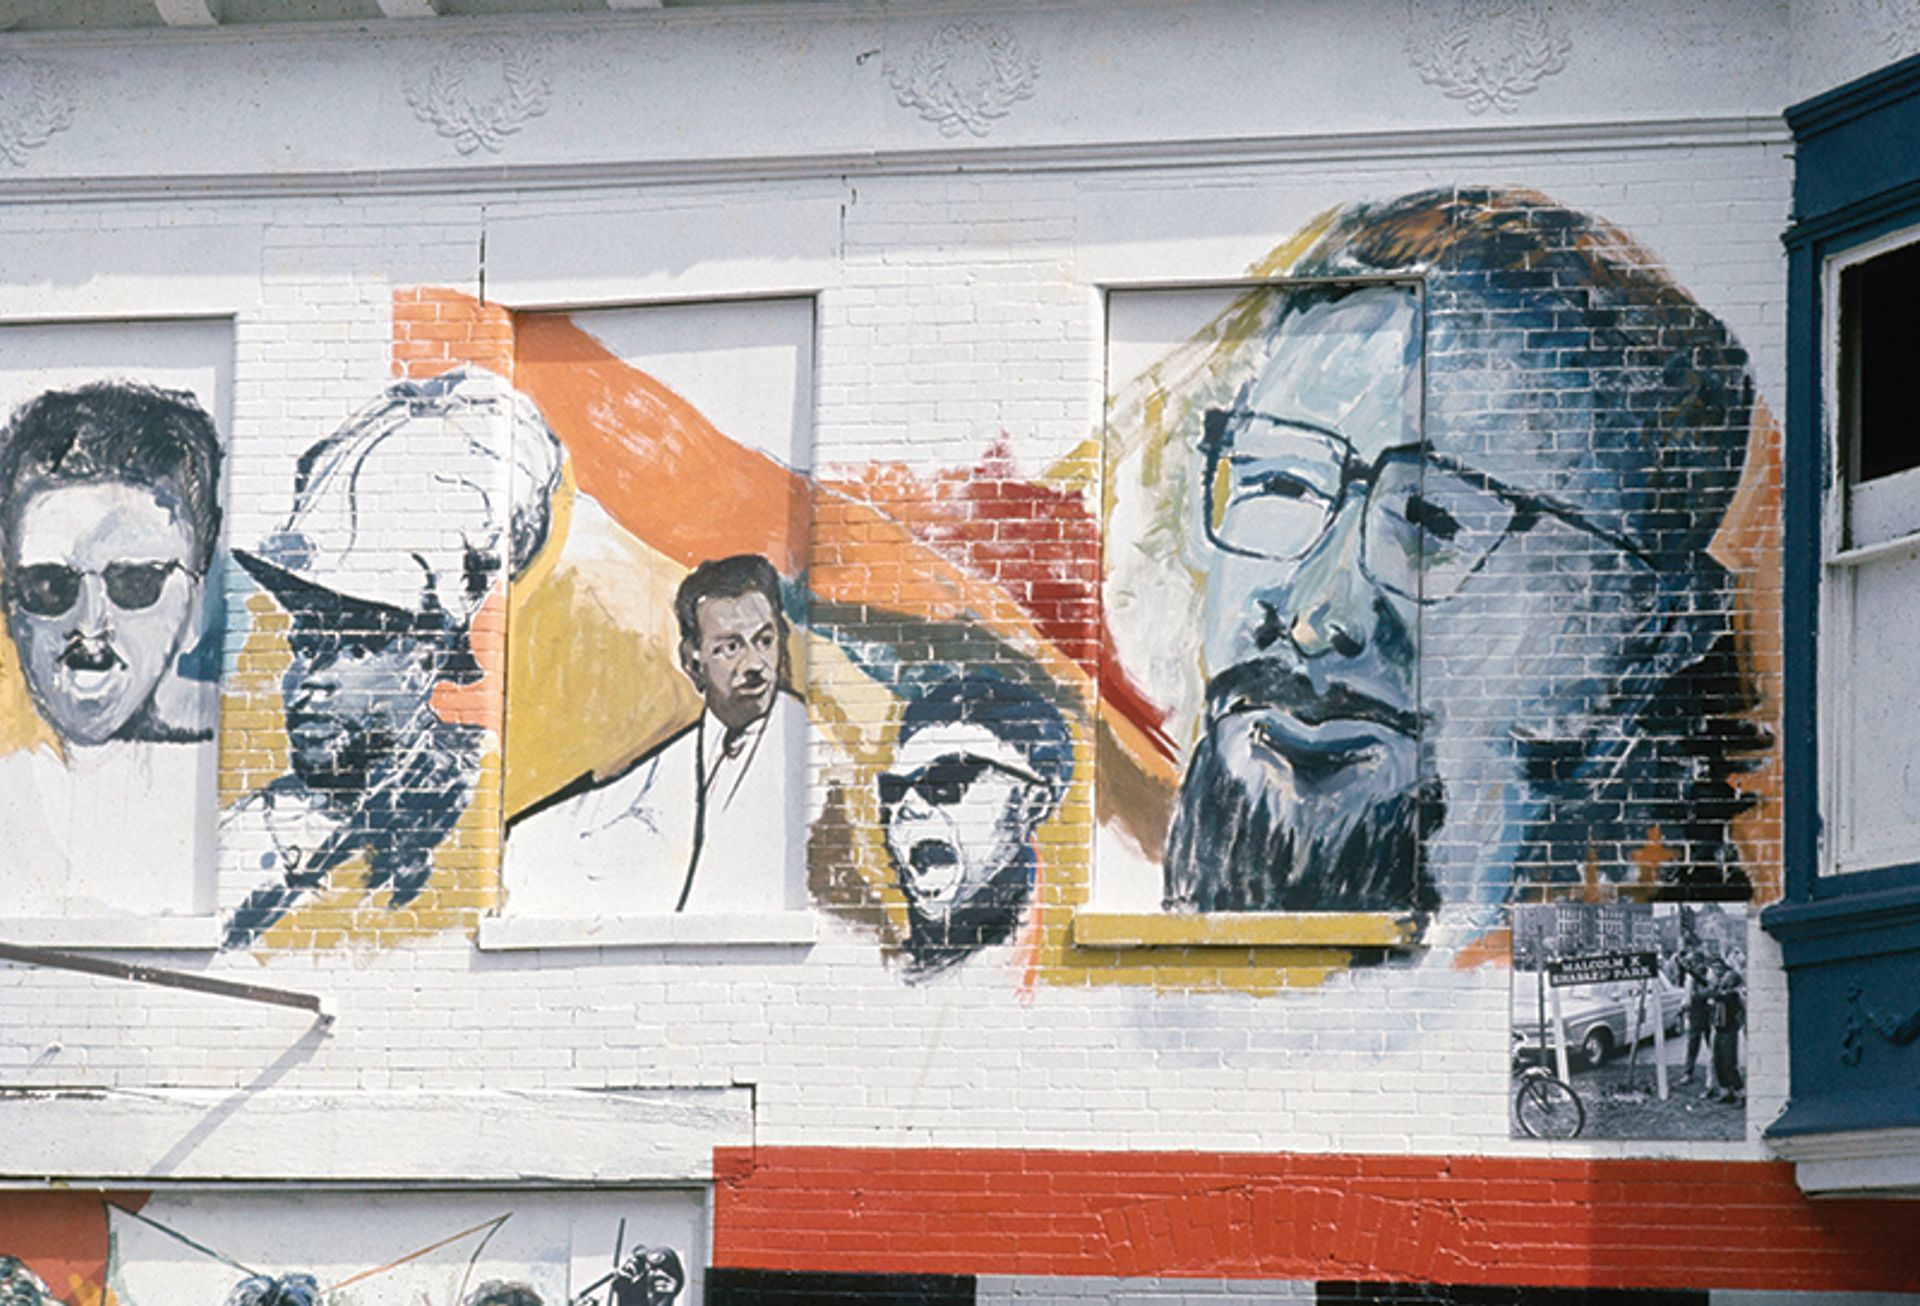 Detail from BAC Visual Artists Workshop's Wall of Respect mural (1967), now destroyed Photo by Robert Sengstacke; courtesy of Sengstacke Archive, University of Chicago Library